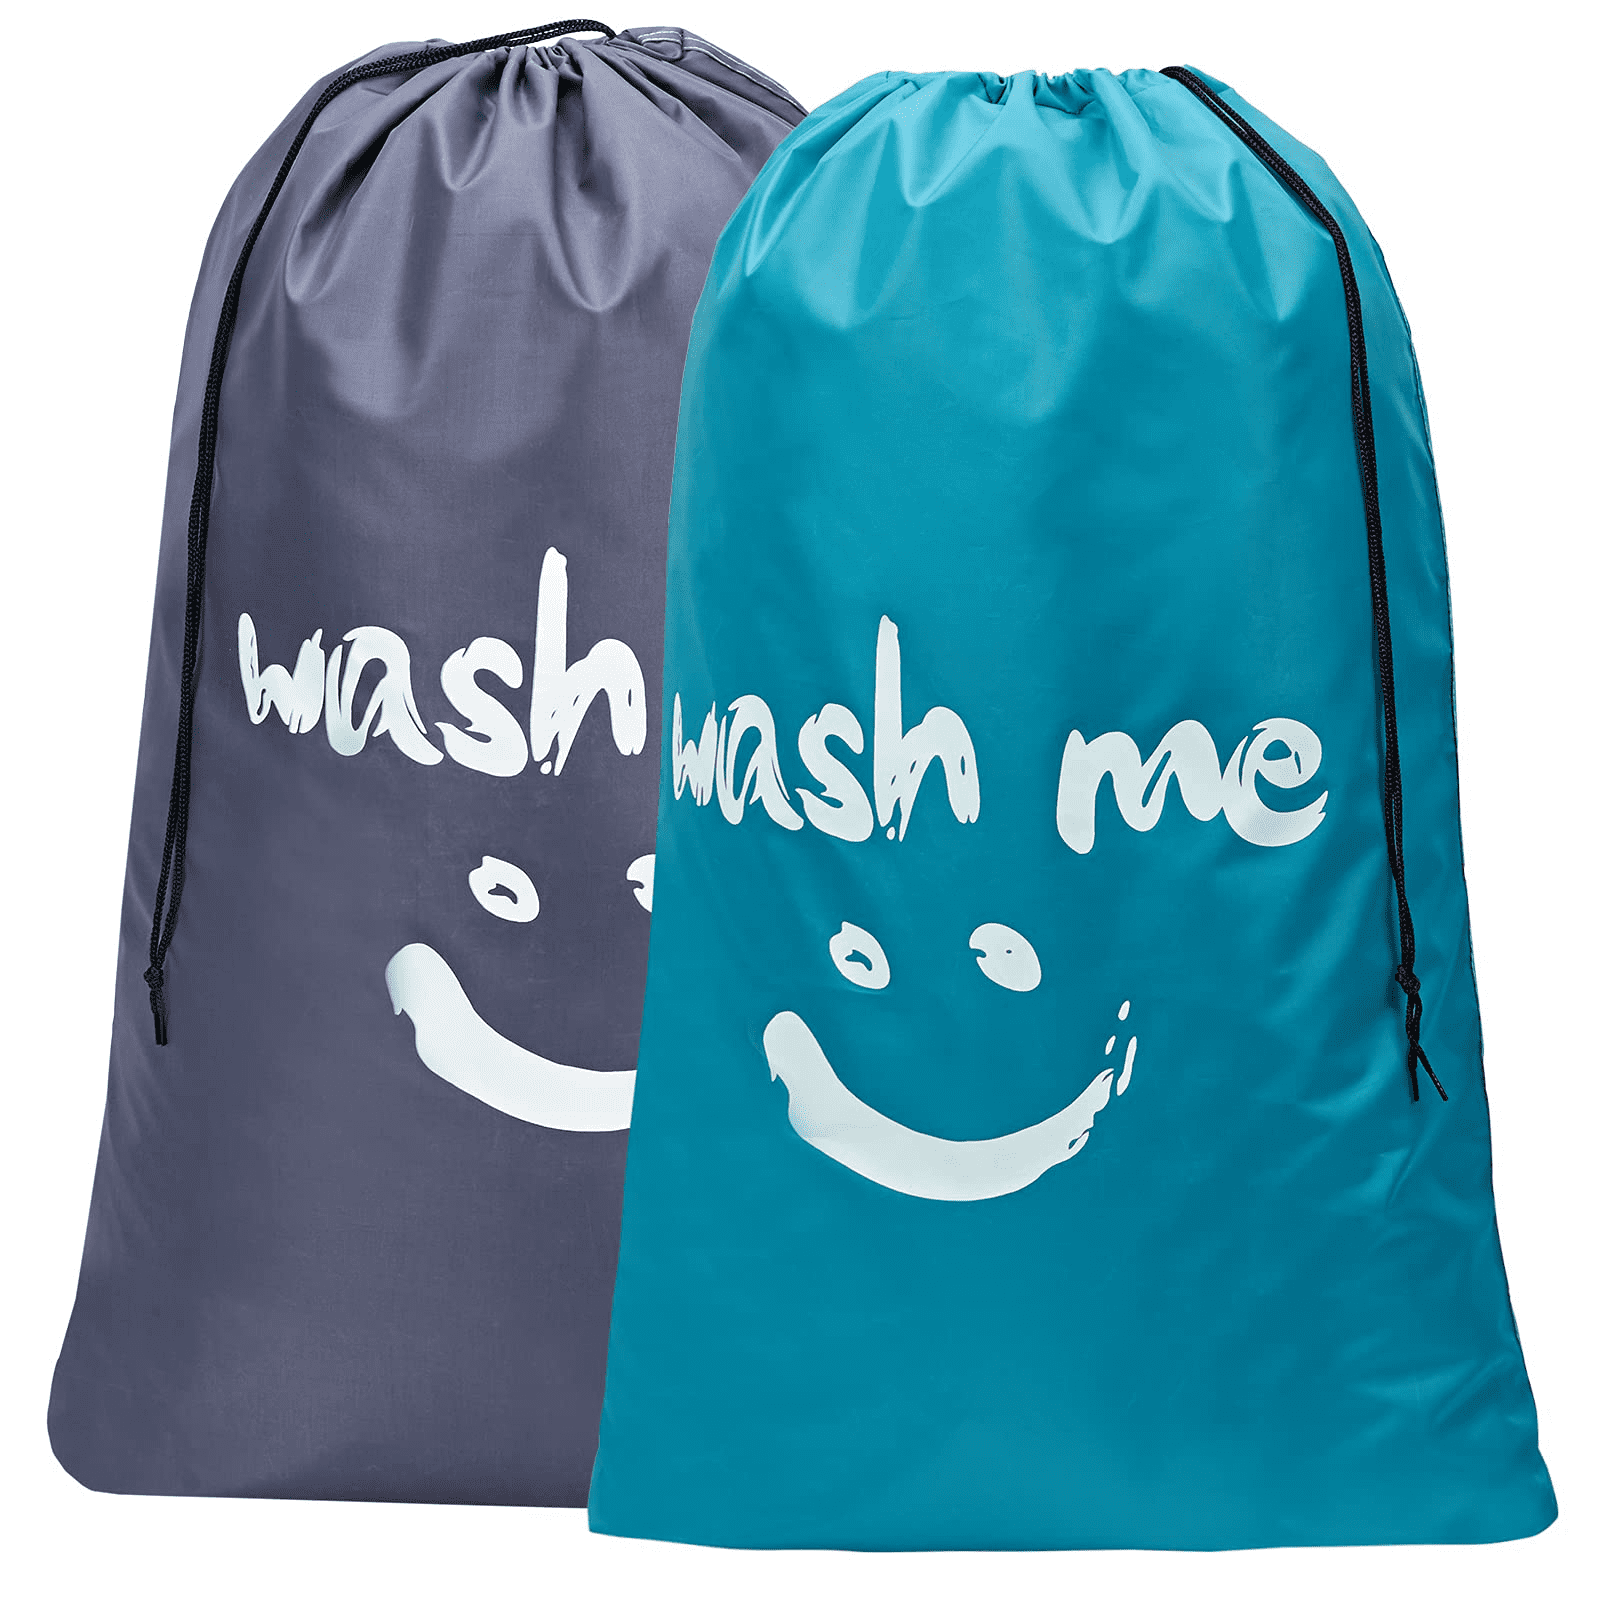 Choose from 16 Colors Small Heavy Duty Laundry Bag for Weekly Use 22W x 28L 